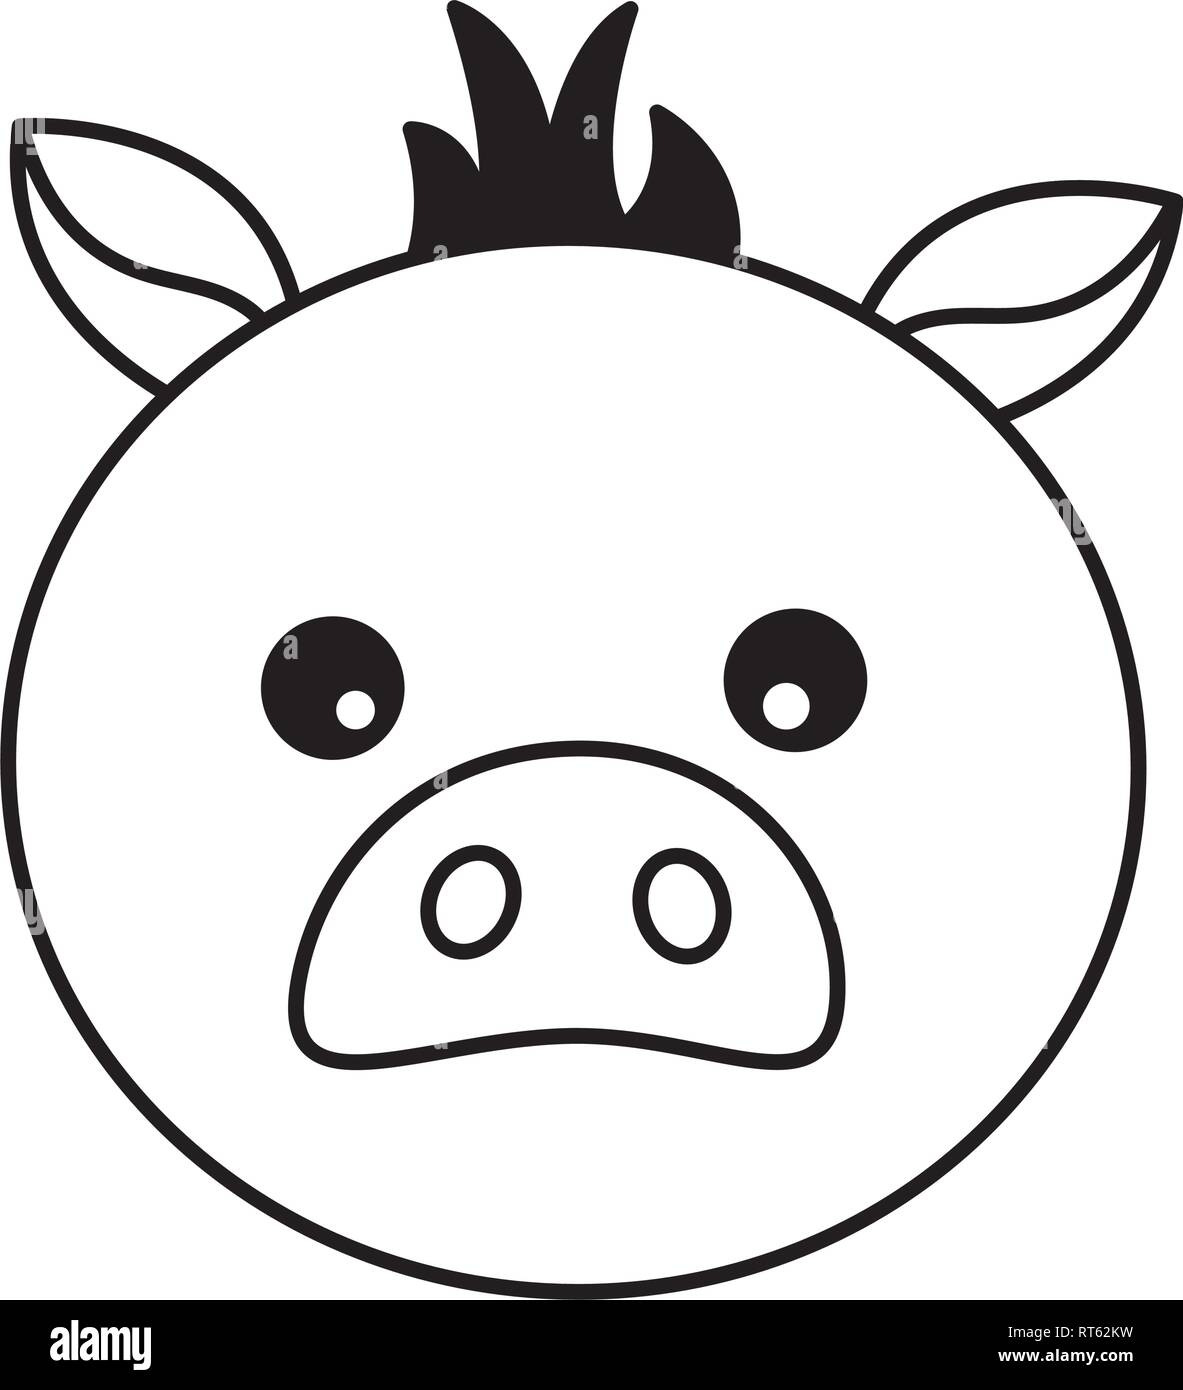 lion mask clipart black and white pig